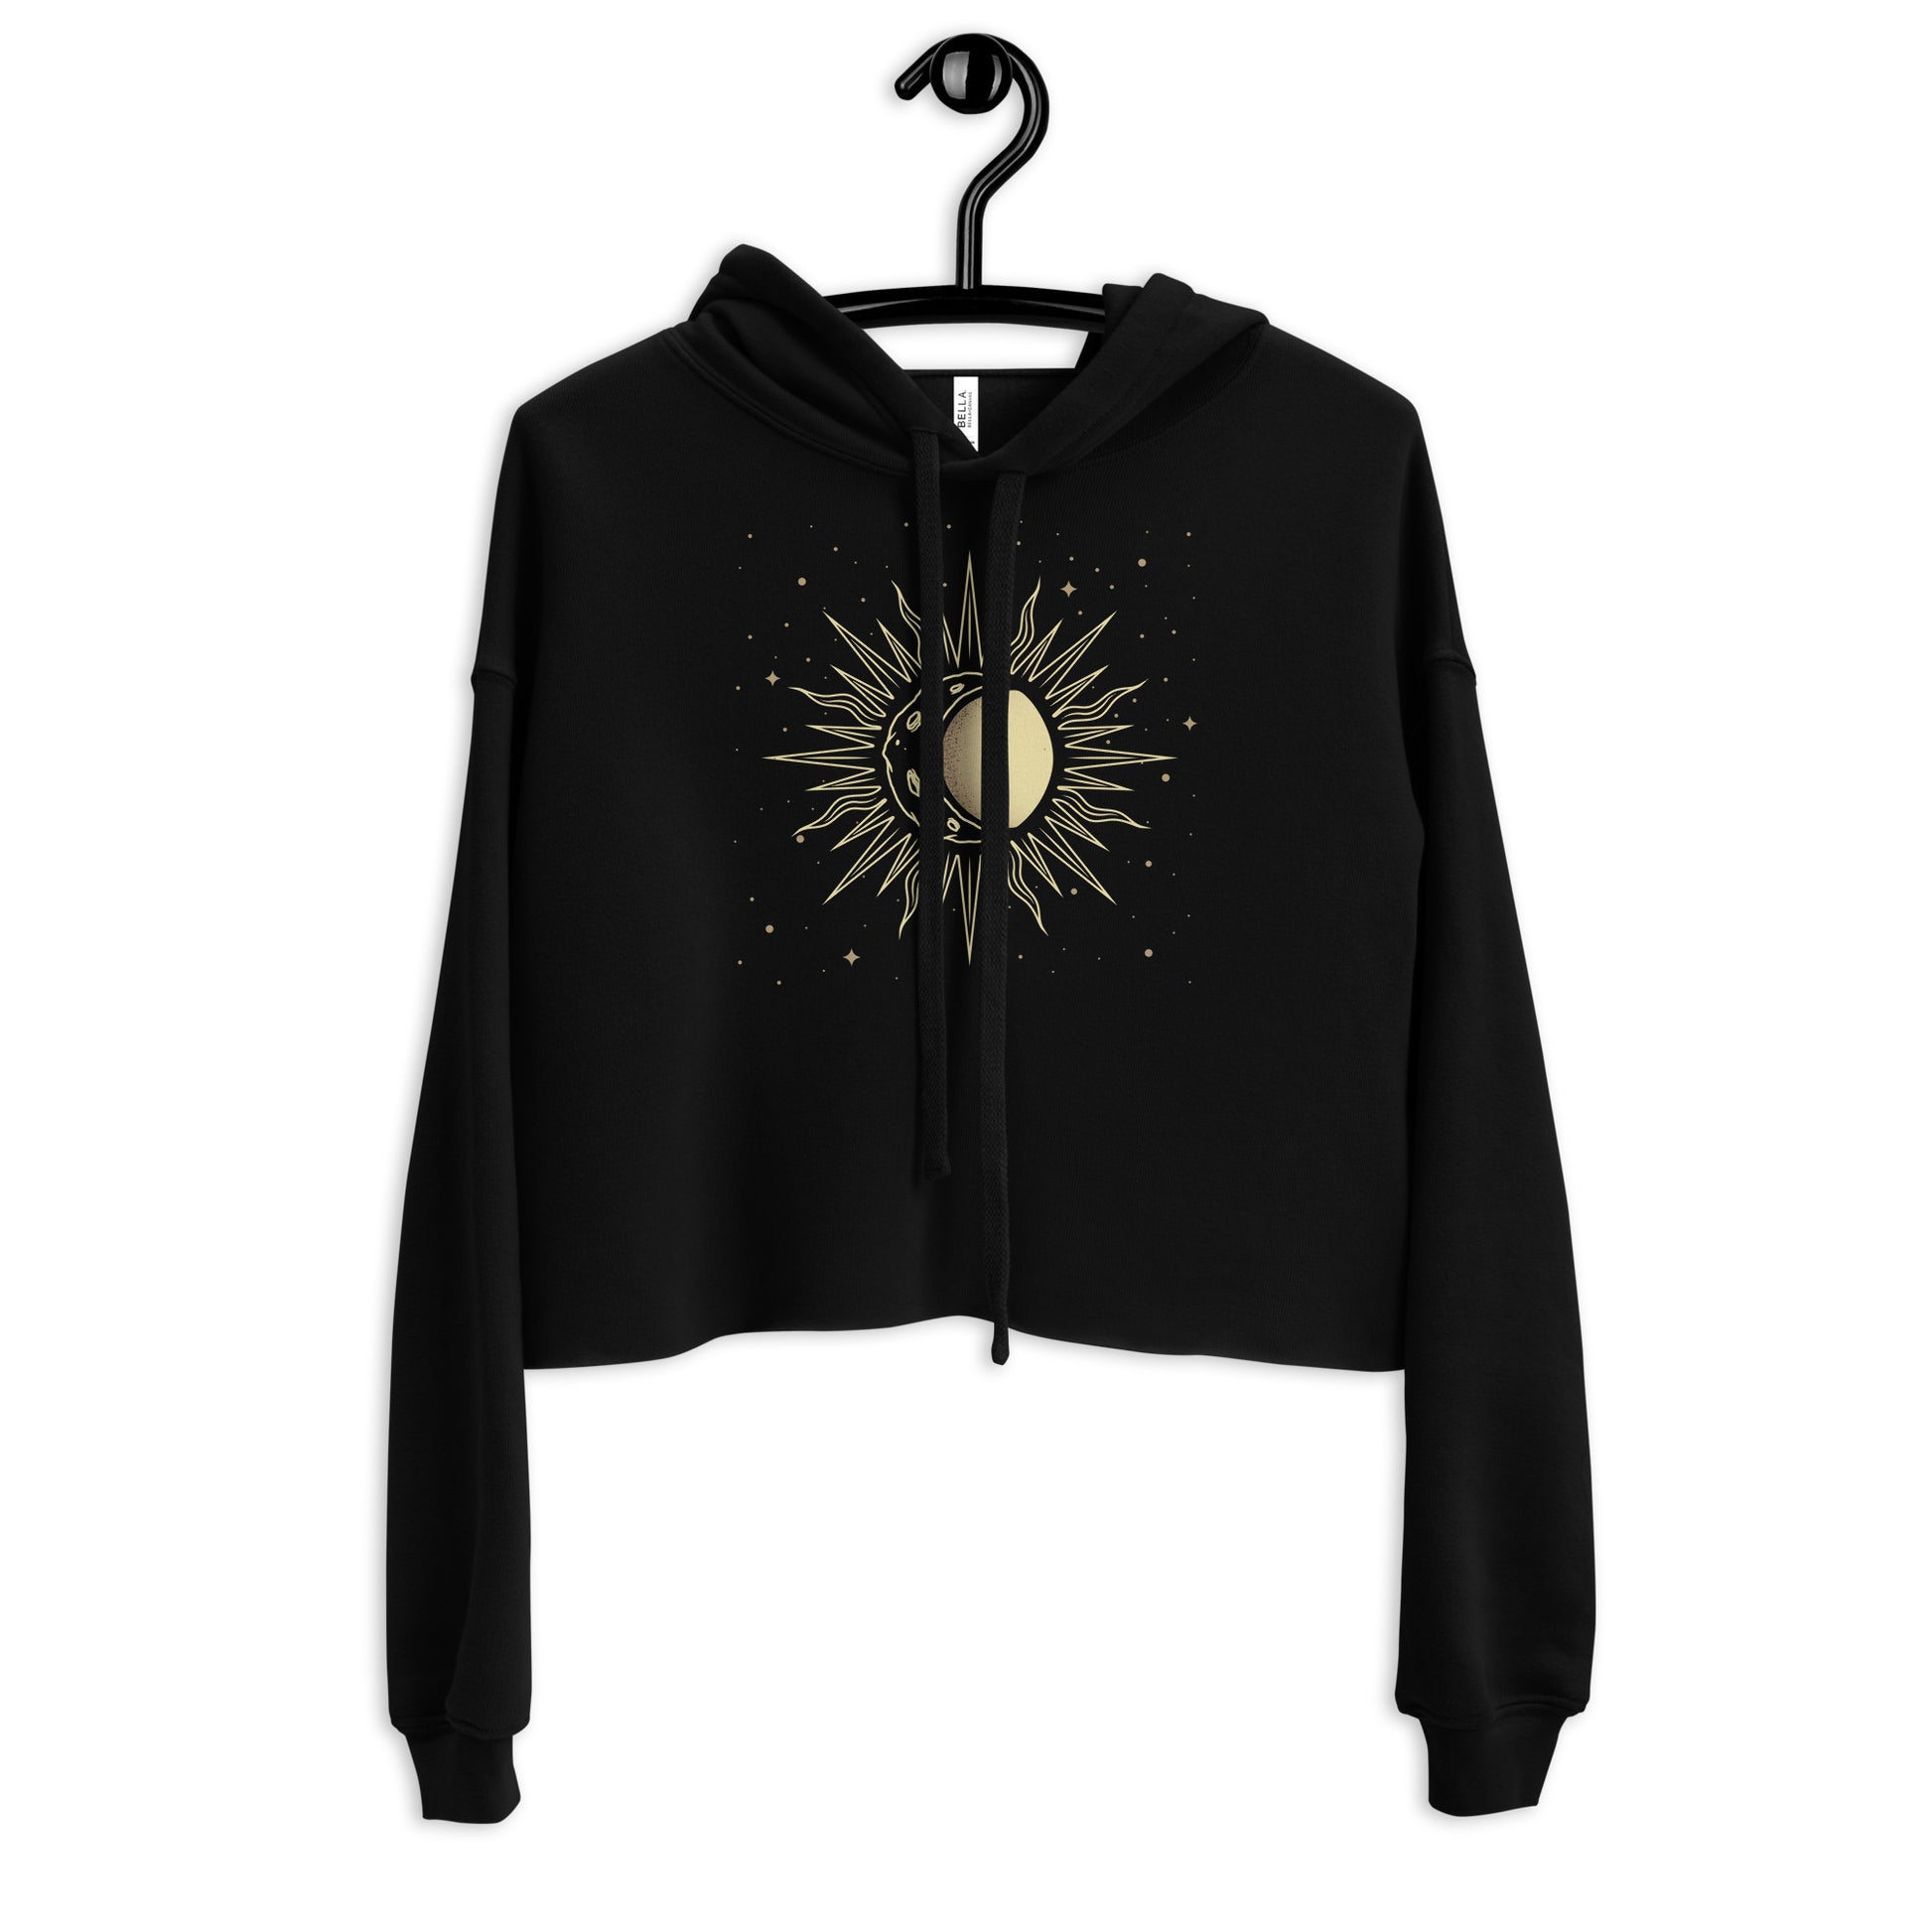 Sun Moon Women Cropped Hoodie, Crescent Half Constellation Aesthetic Graphic Hooded Pullover Sweatshirt Cotton Crop Top Starcove Fashion